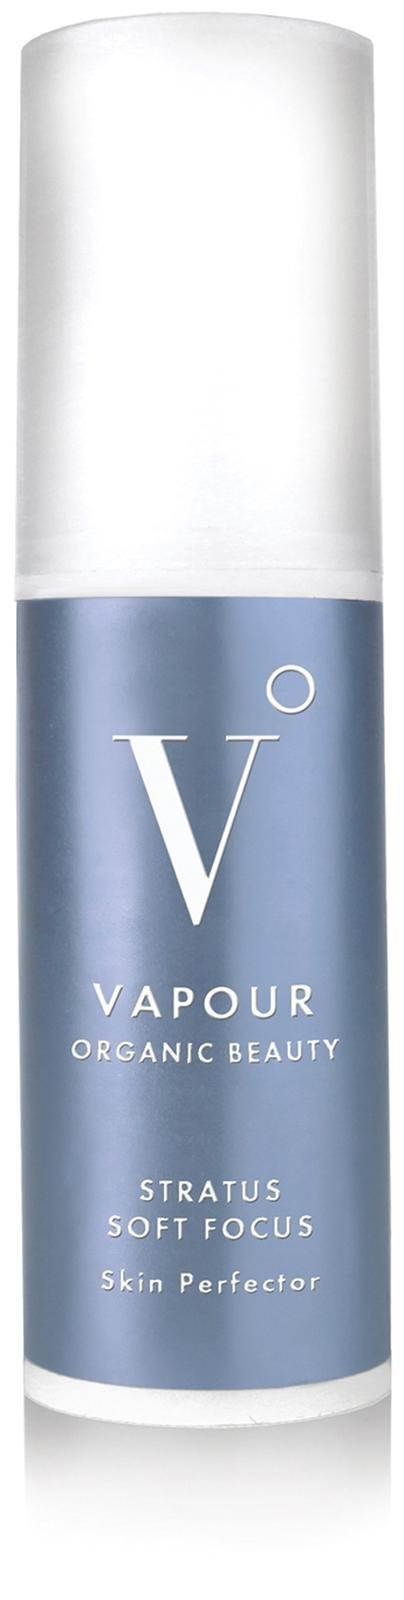 Vapour Organic Beauty Stratus Soft Focus Instant Skin Perfector - S904